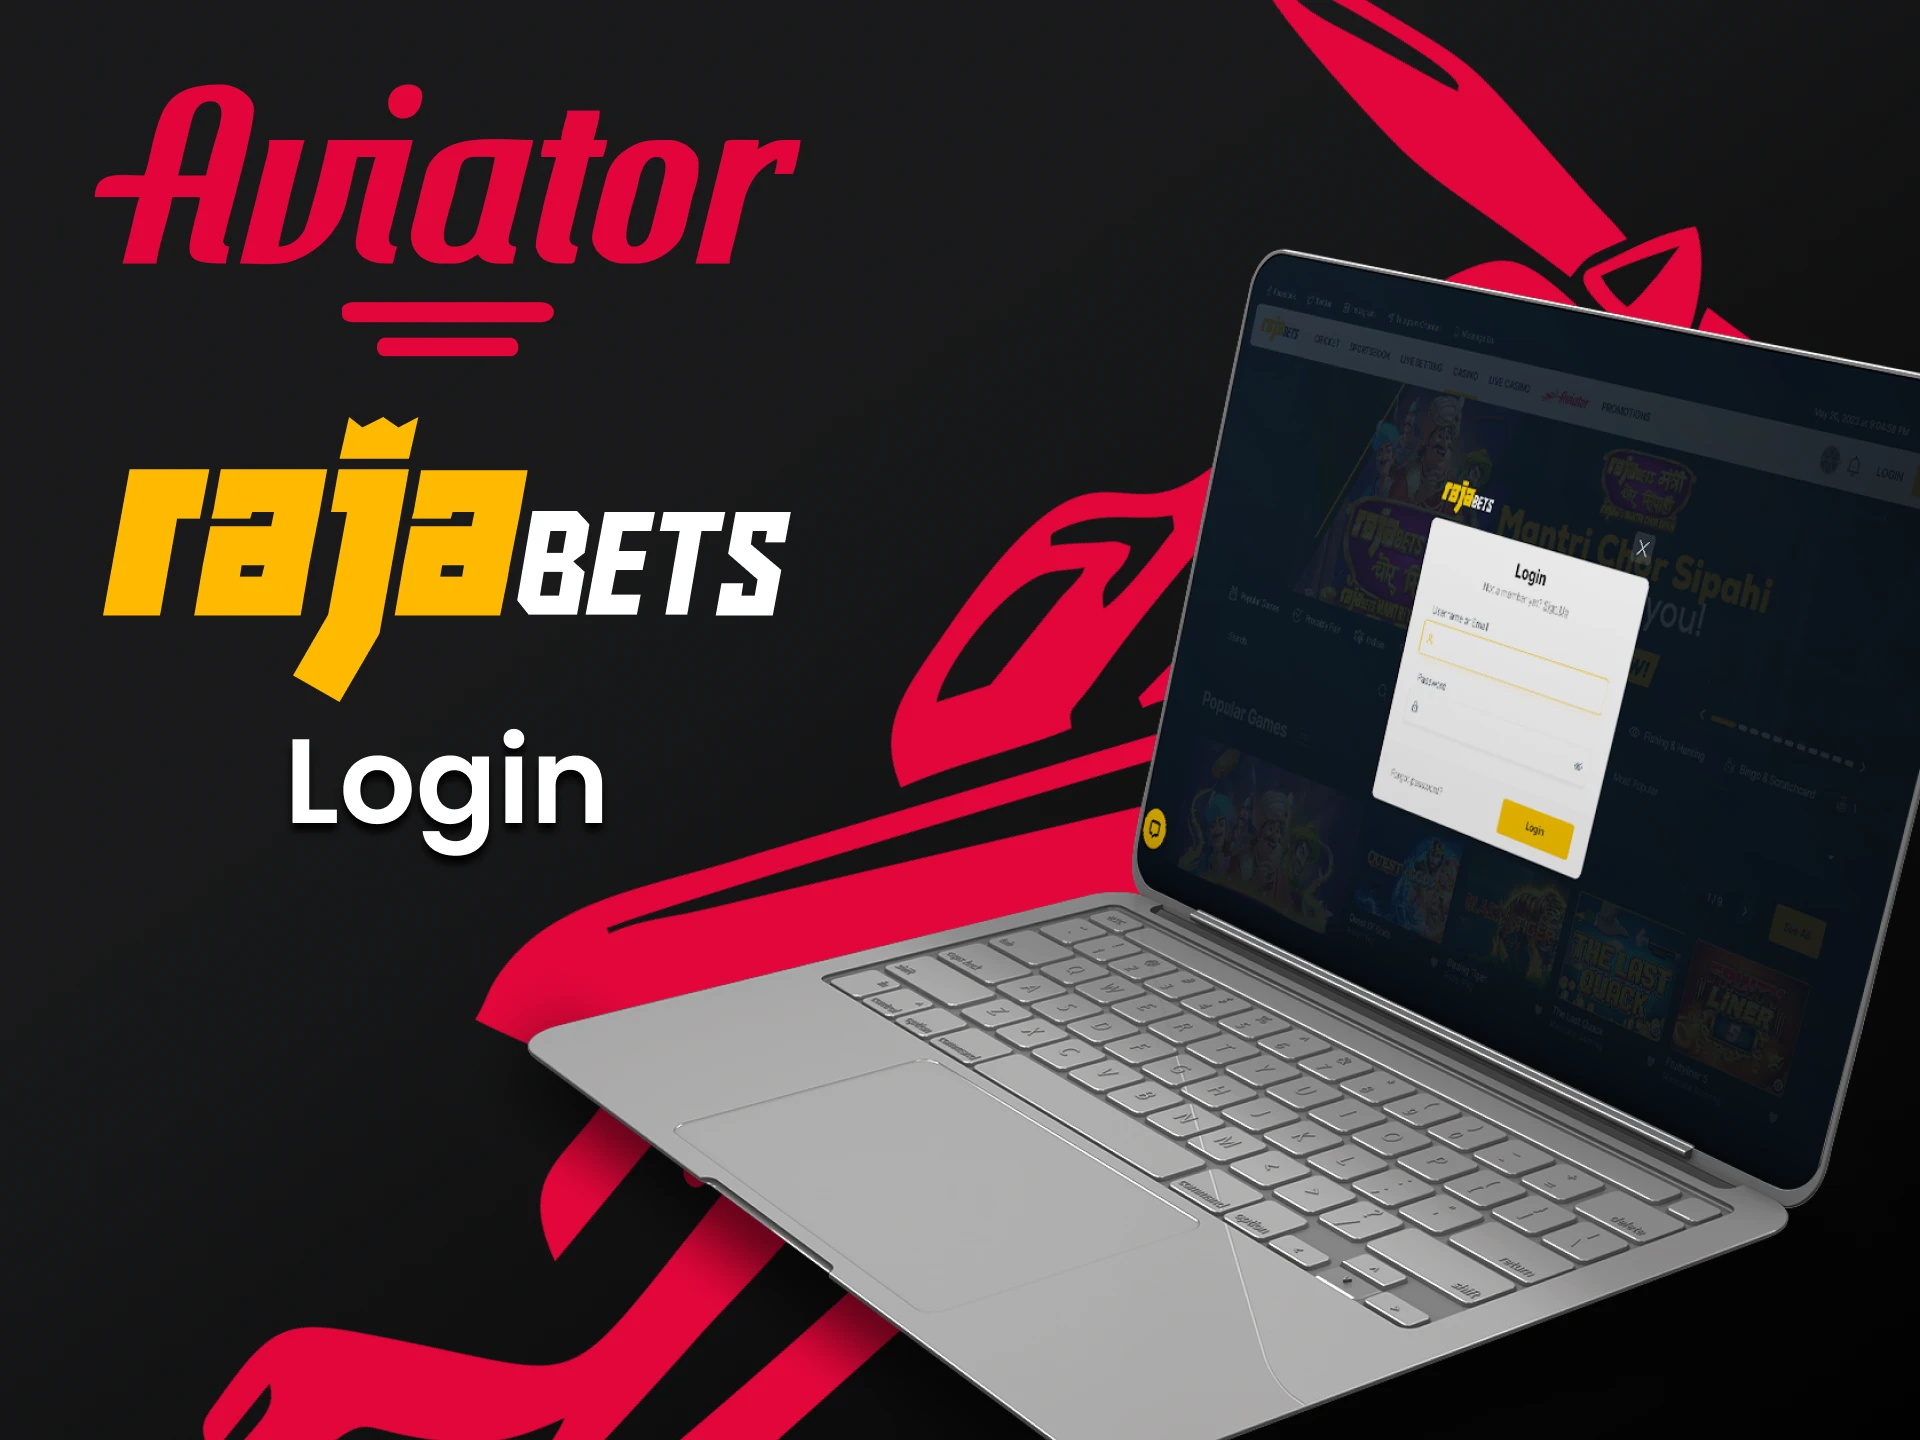 Sign in to your Rajabets Account and start playing Aviator.